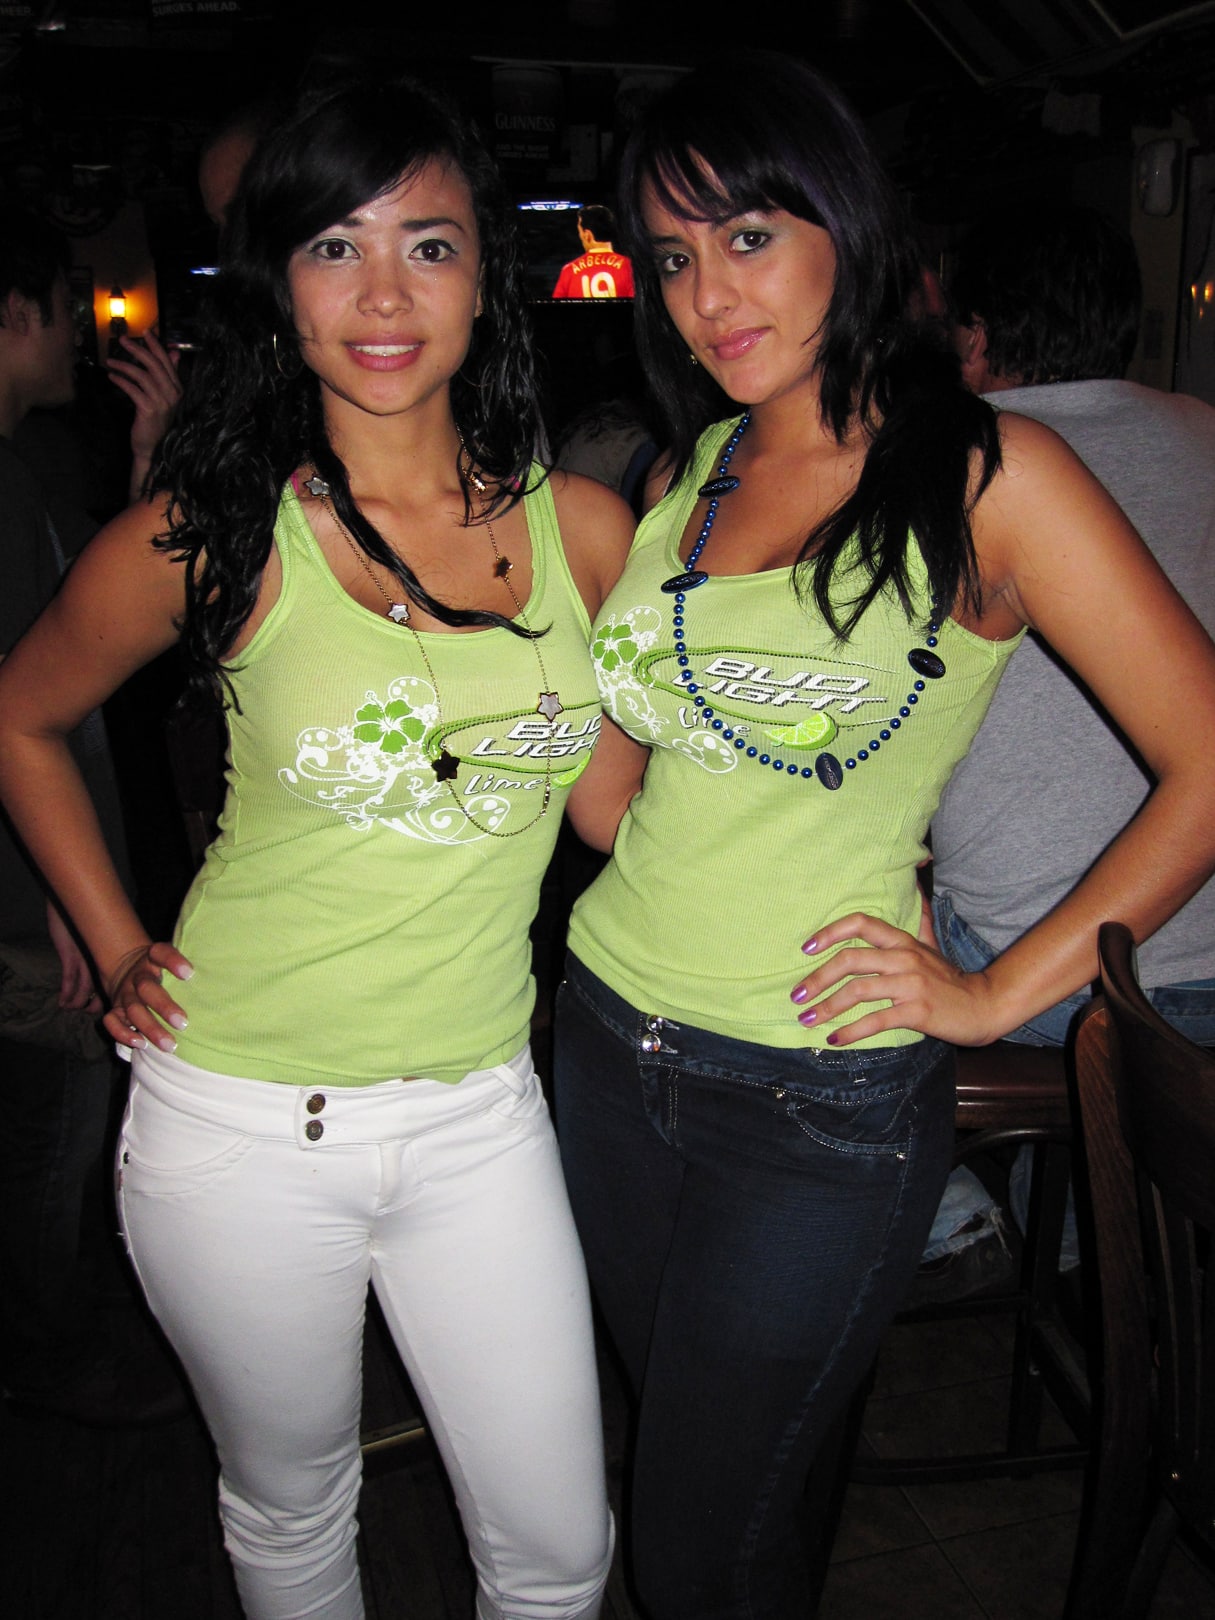 world cup watch party at Mulligan's in 2010